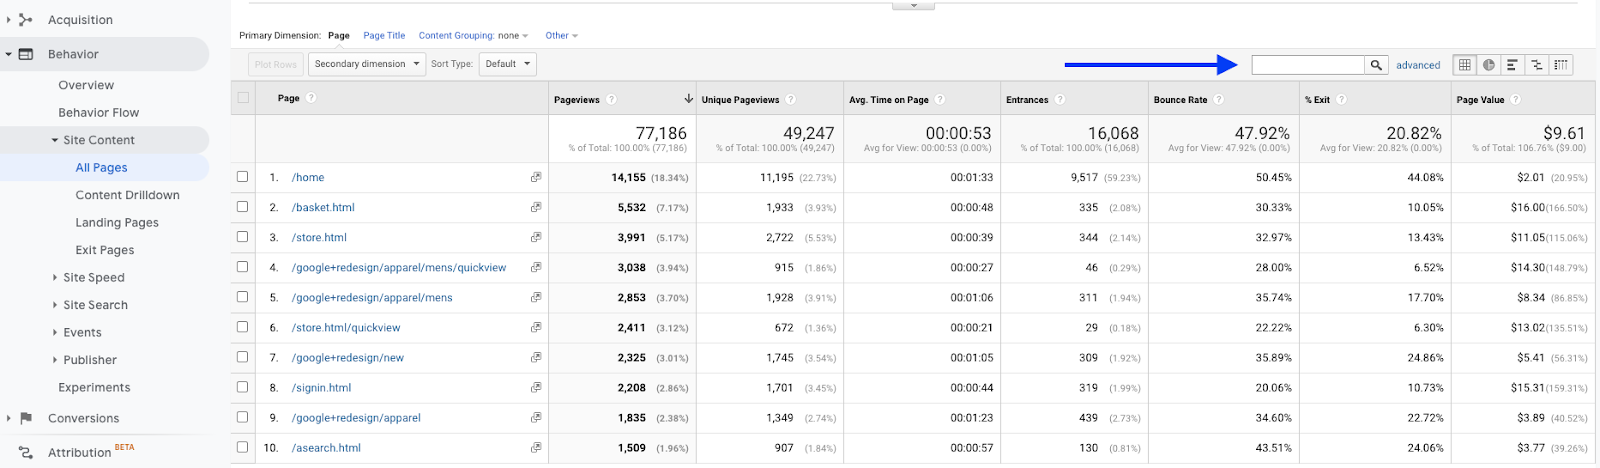 image showing the advanced google analytics view